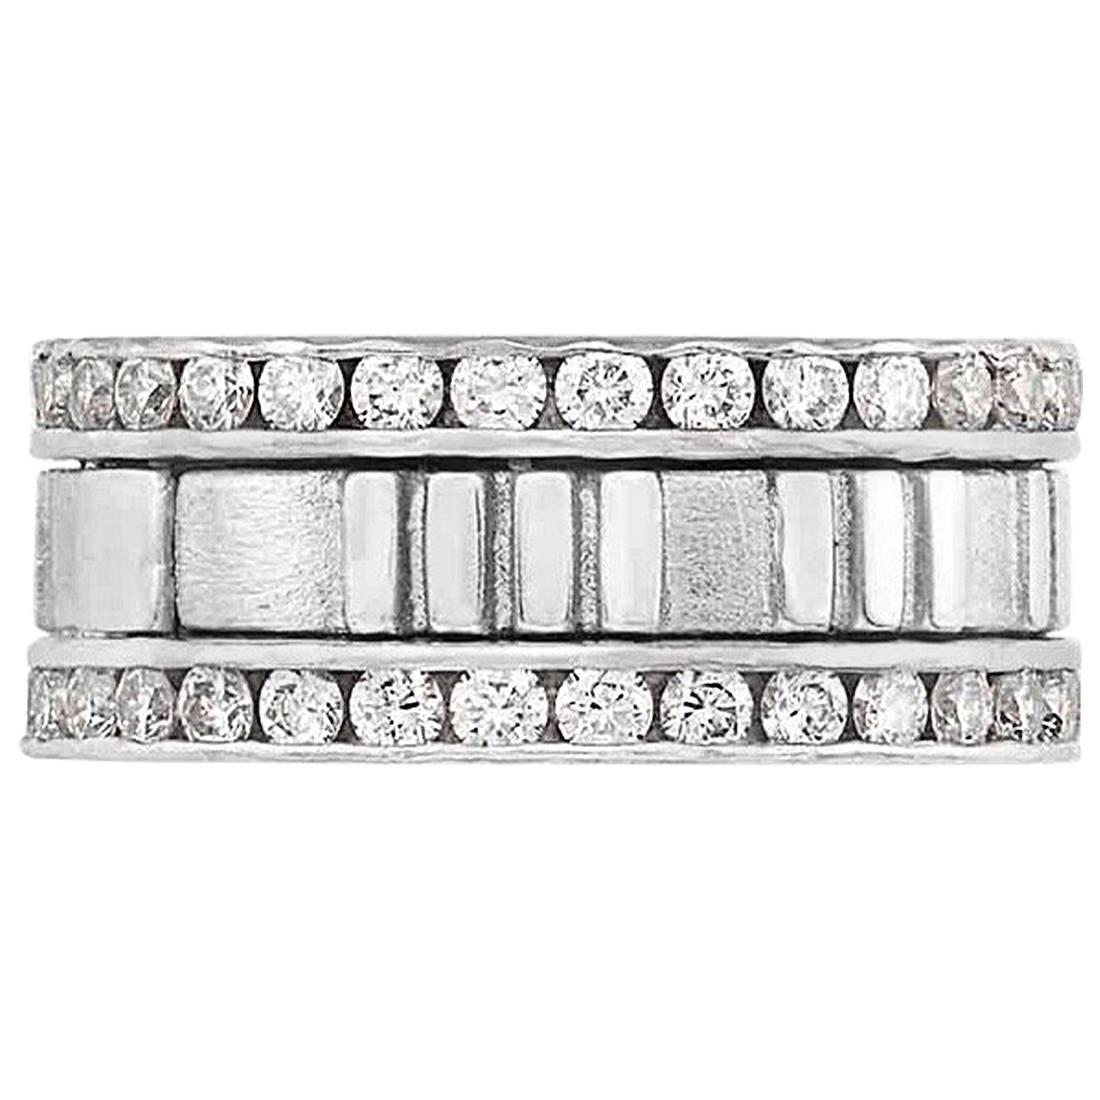 Tiffany & Co. 1.55 Carat Diamond and White Gold 'Atlas' Band Ring For Sale